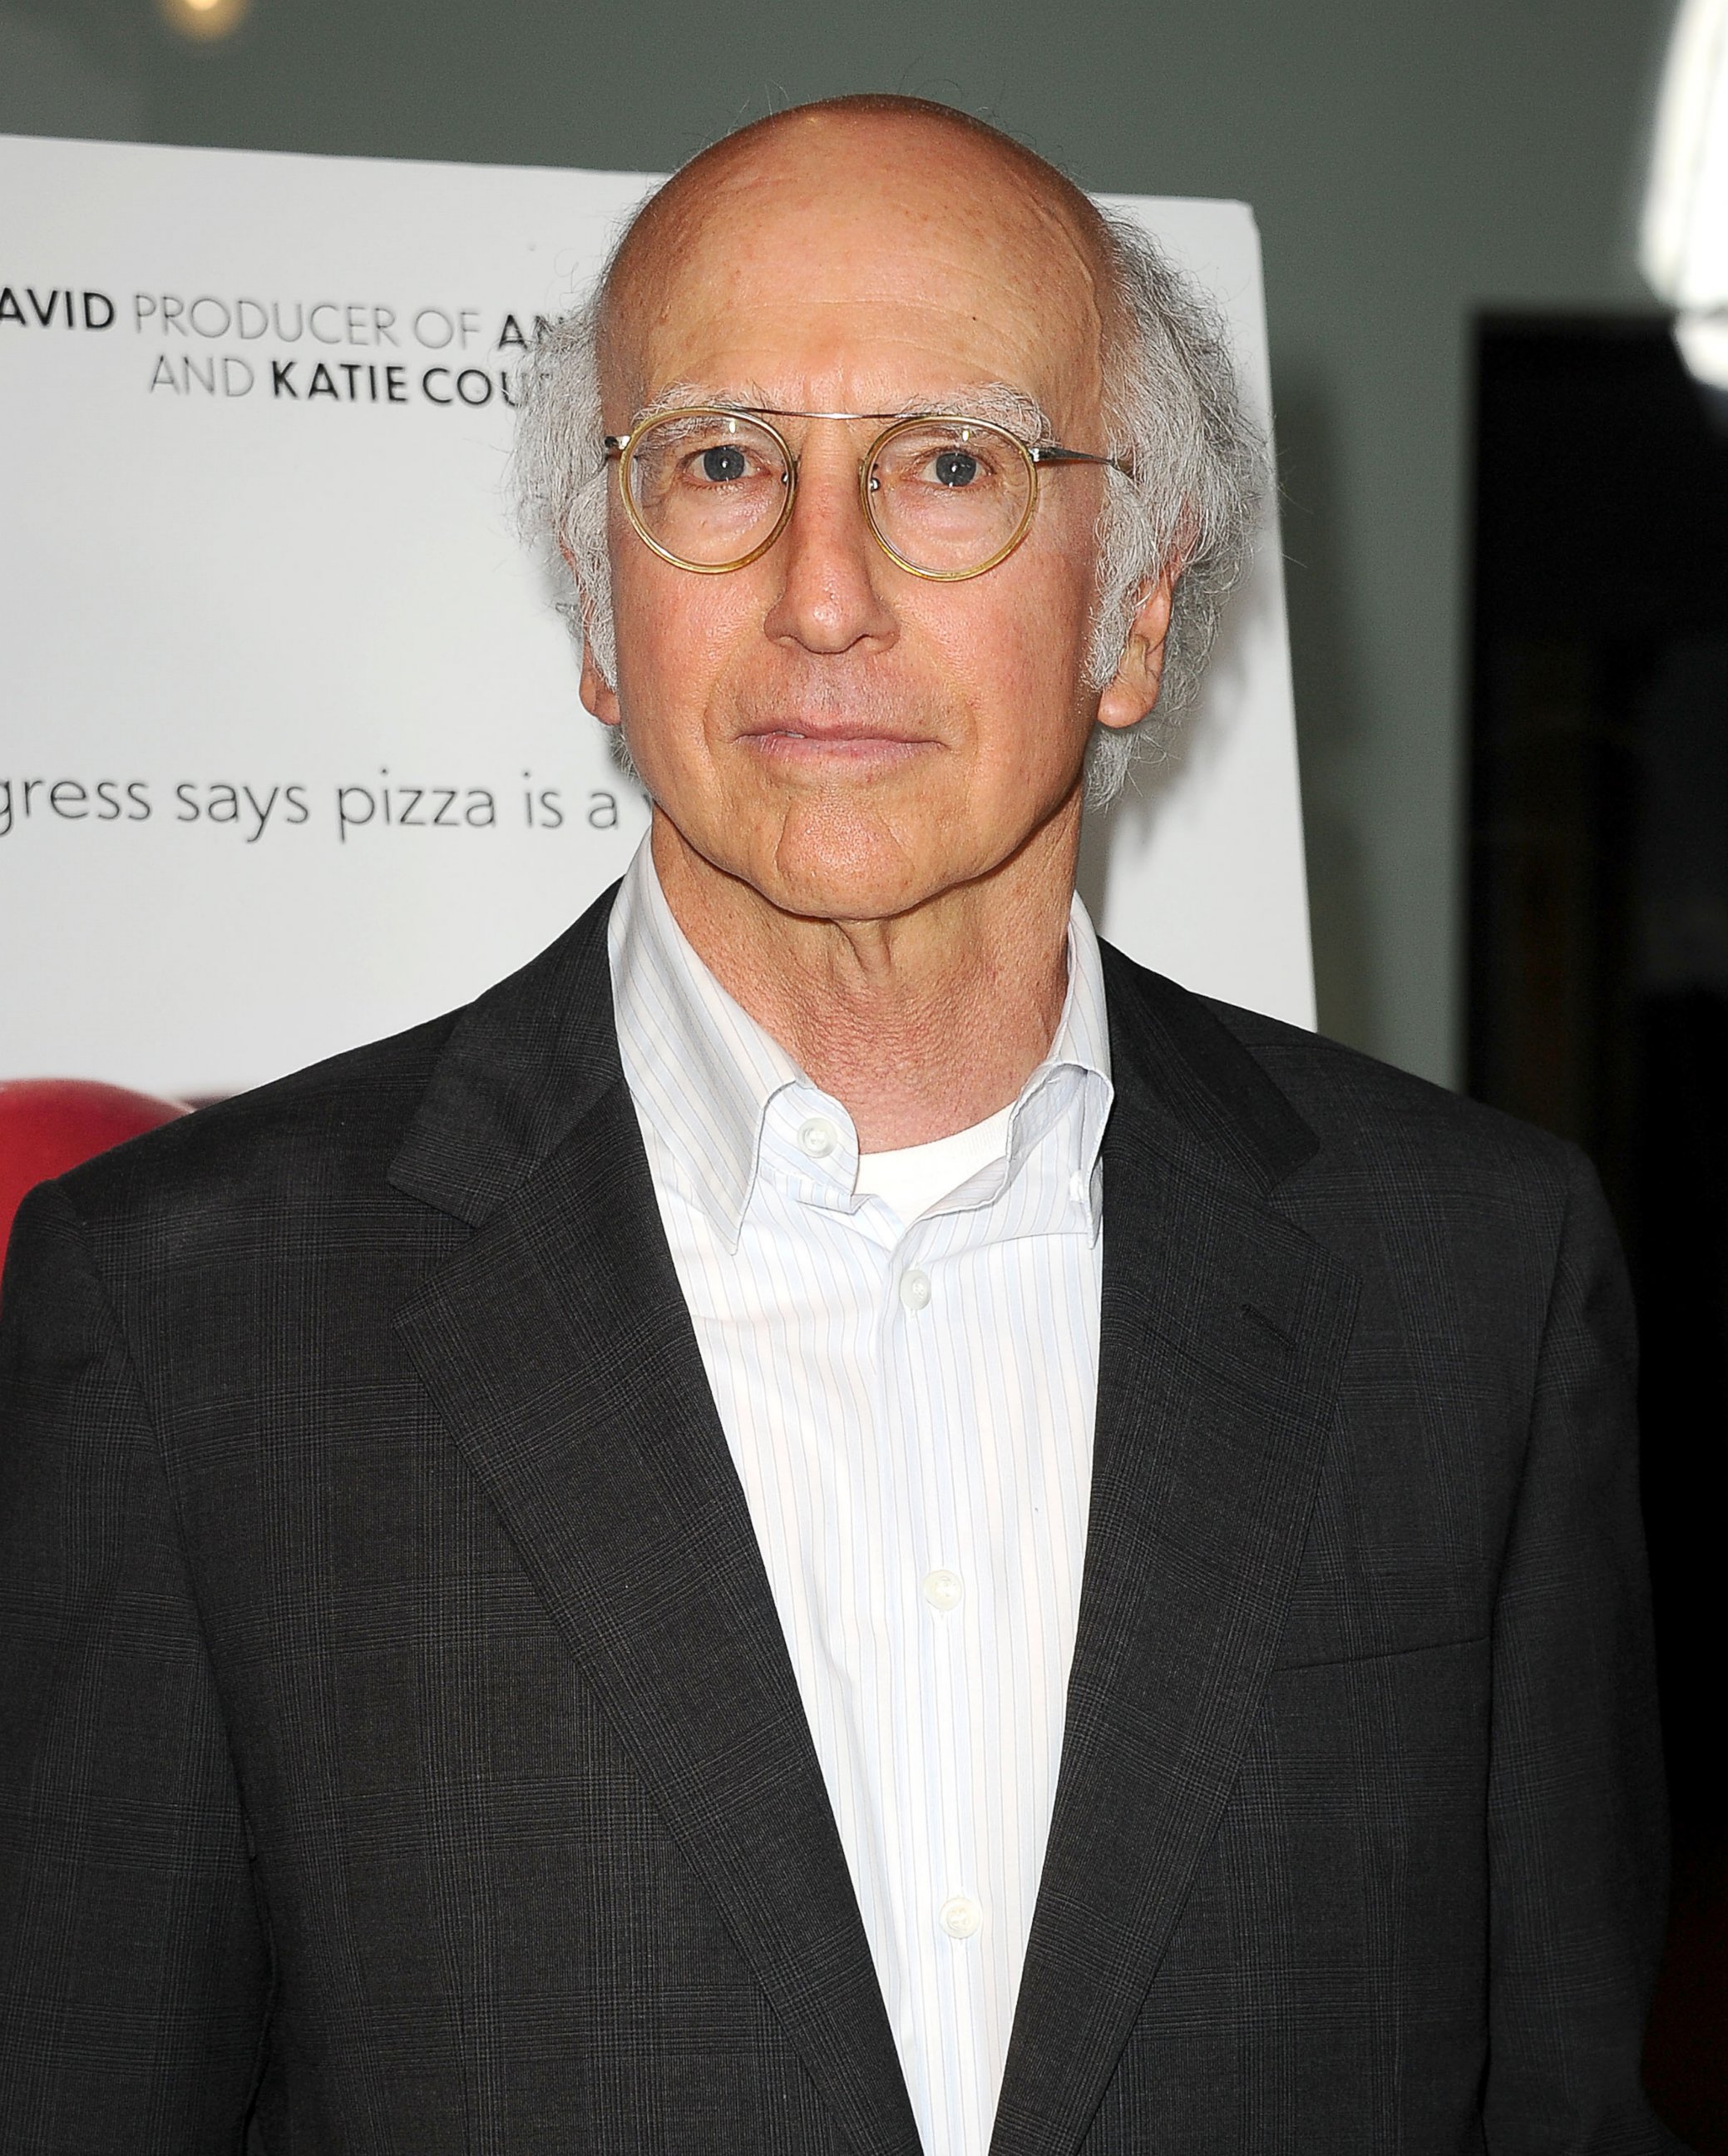 PHOTO: Larry David attends the premiere of "Fed Up" at Pacfic Design Center, May 8, 2014, in West Hollywood, Calif.